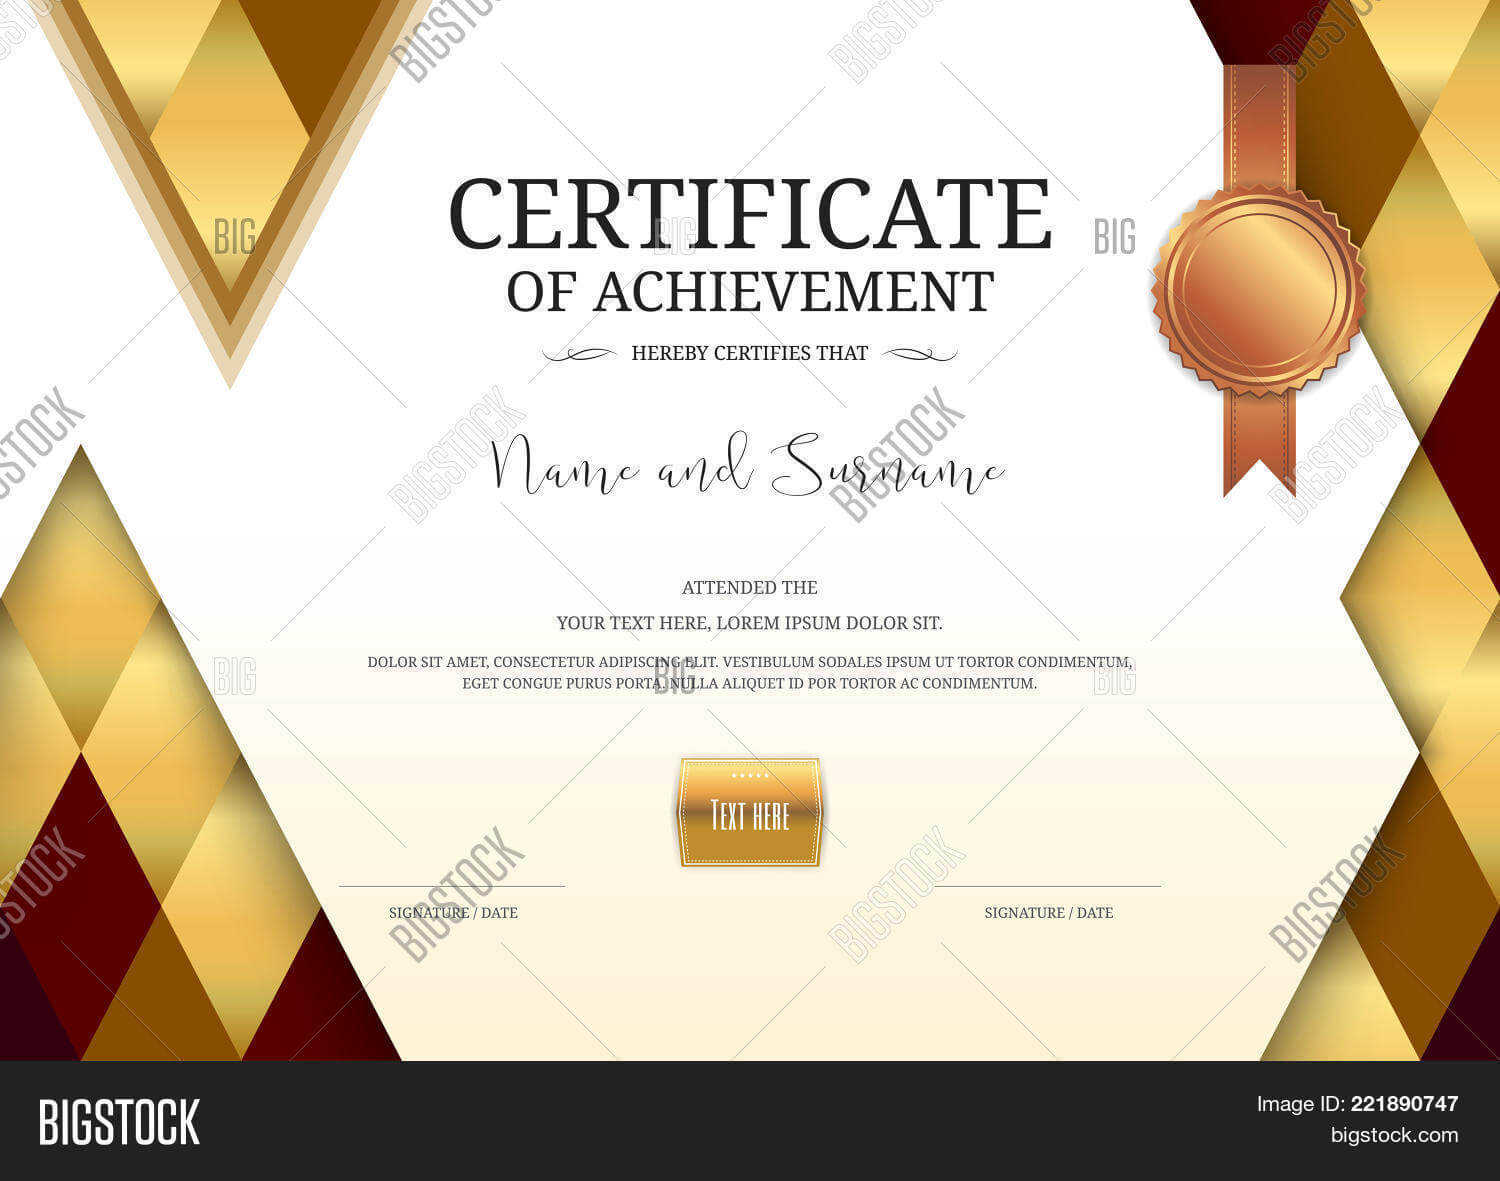 Luxury Certificate Vector & Photo (Free Trial) | Bigstock With Elegant Certificate Templates Free